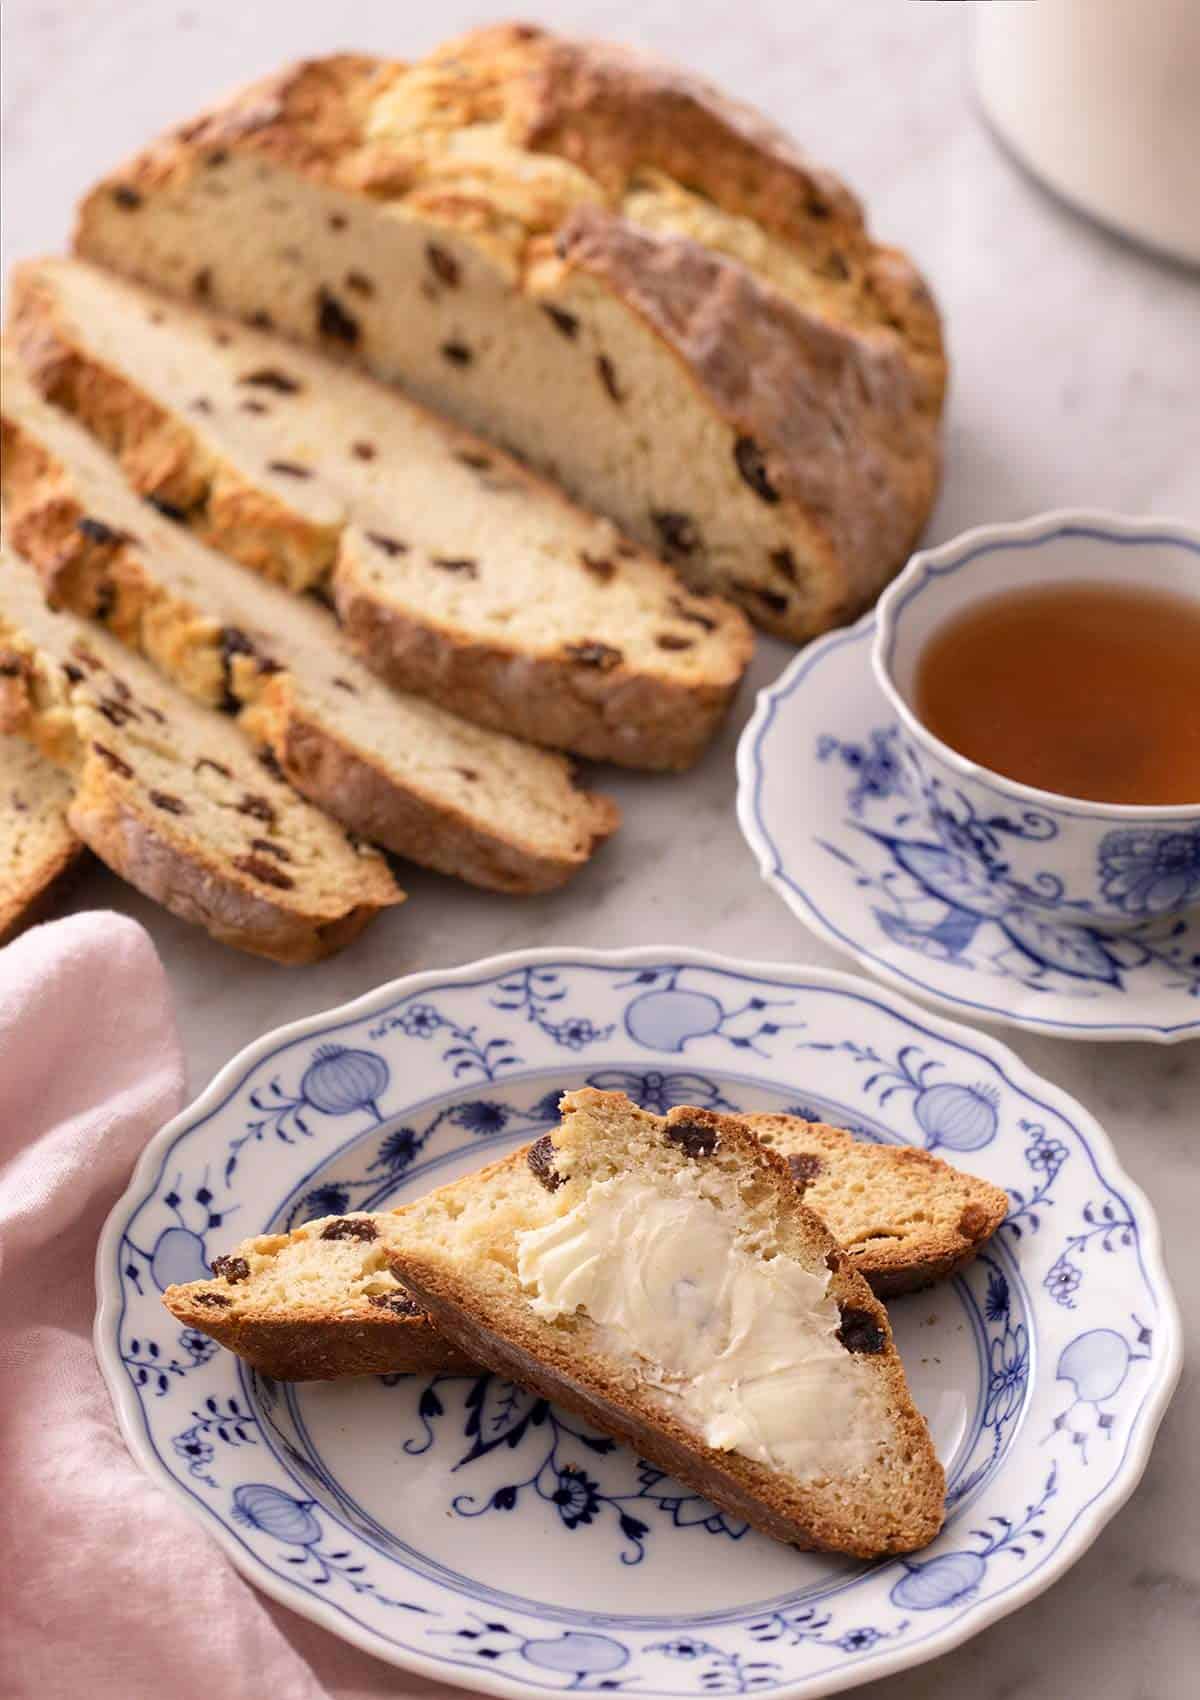 Slices of Irish soda bread spread with butter on a blue plate